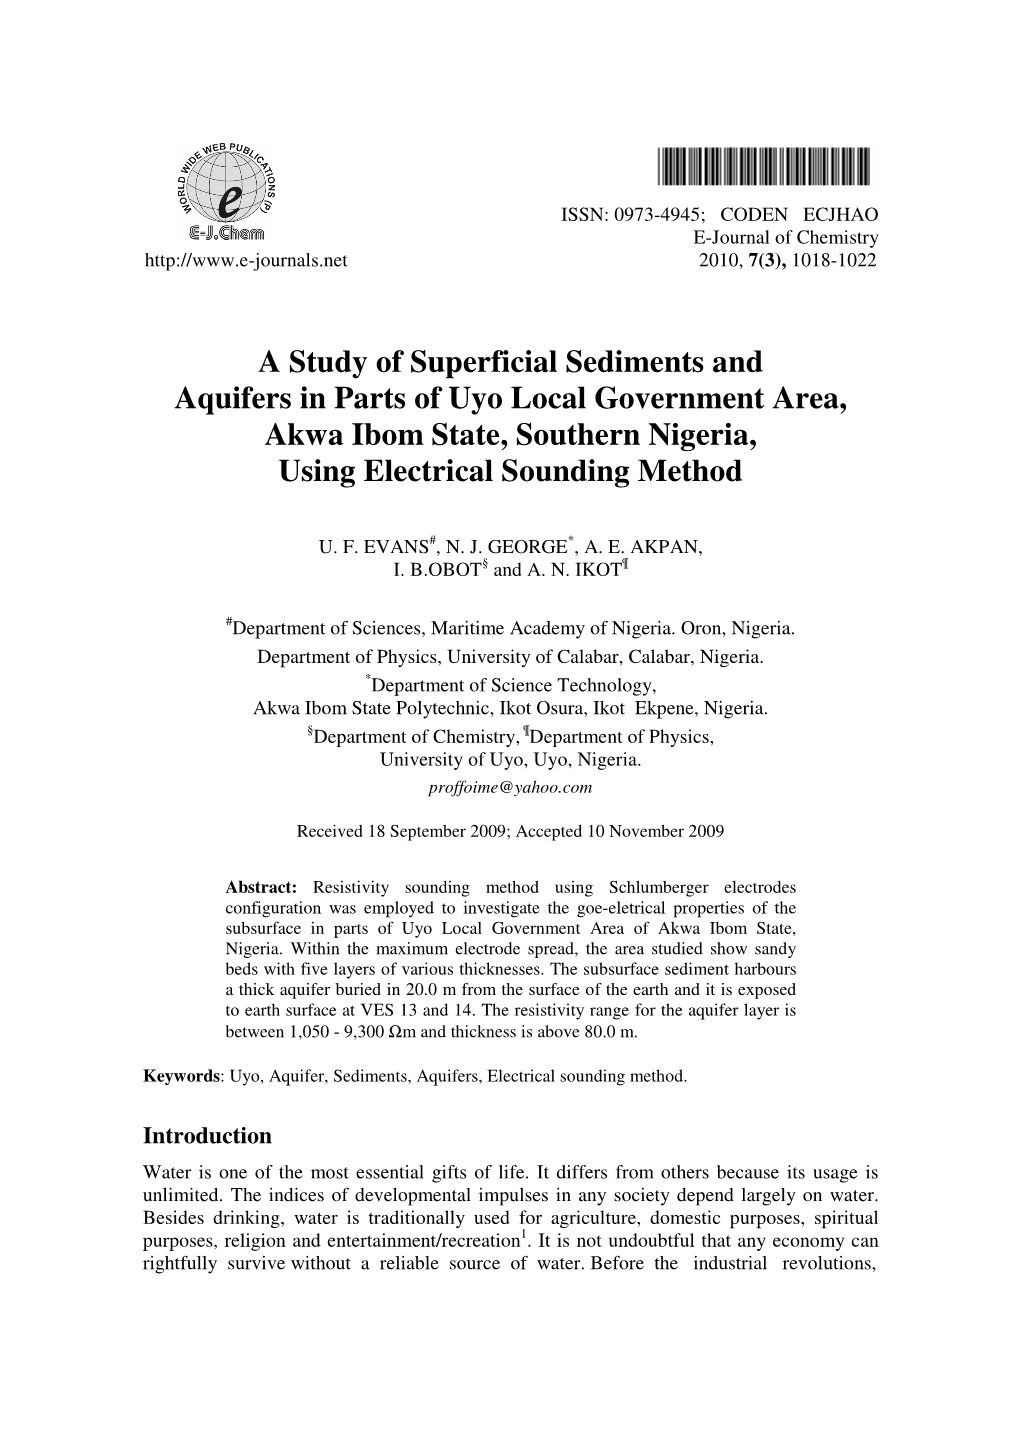 A Study of Superficial Sediments and Aquifers in Parts of Uyo Local Government Area, Akwa Ibom State, Southern Nigeria, Using Electrical Sounding Method